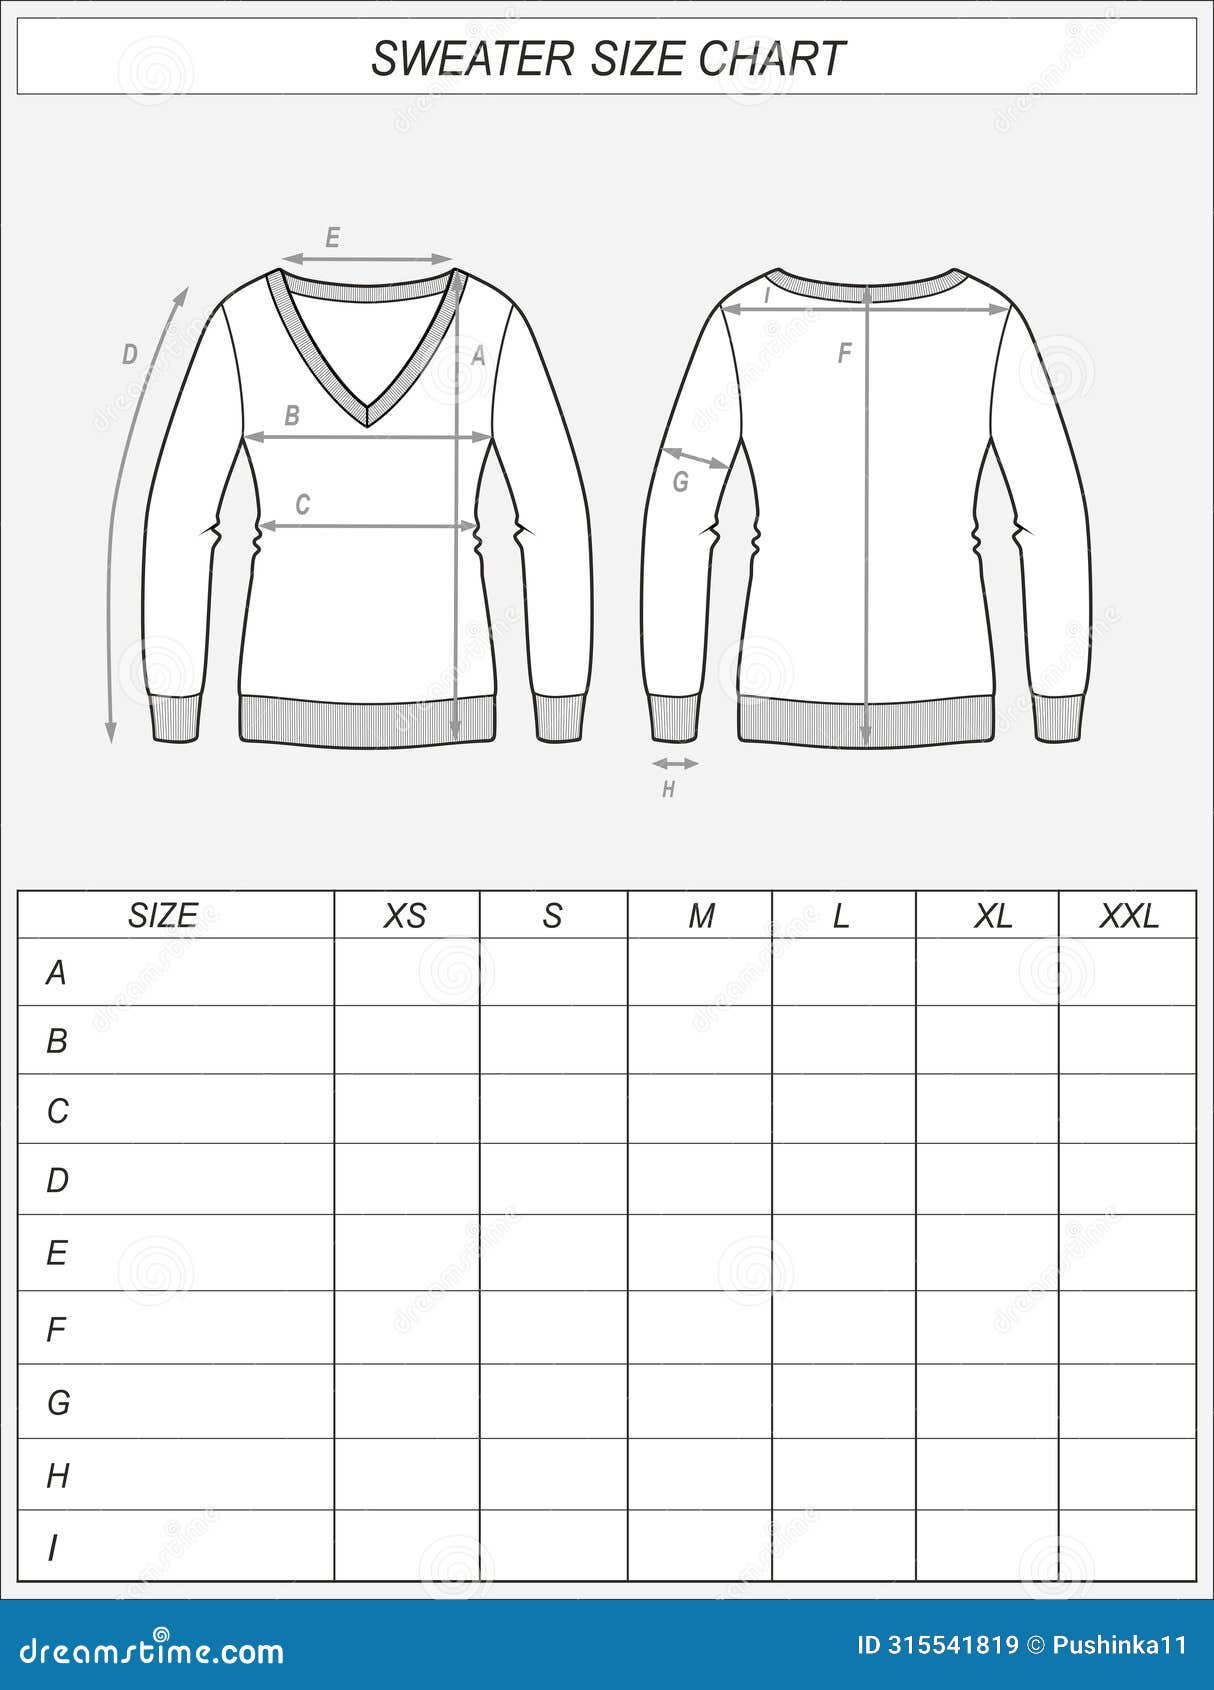 knitted jumper size chart. sweater